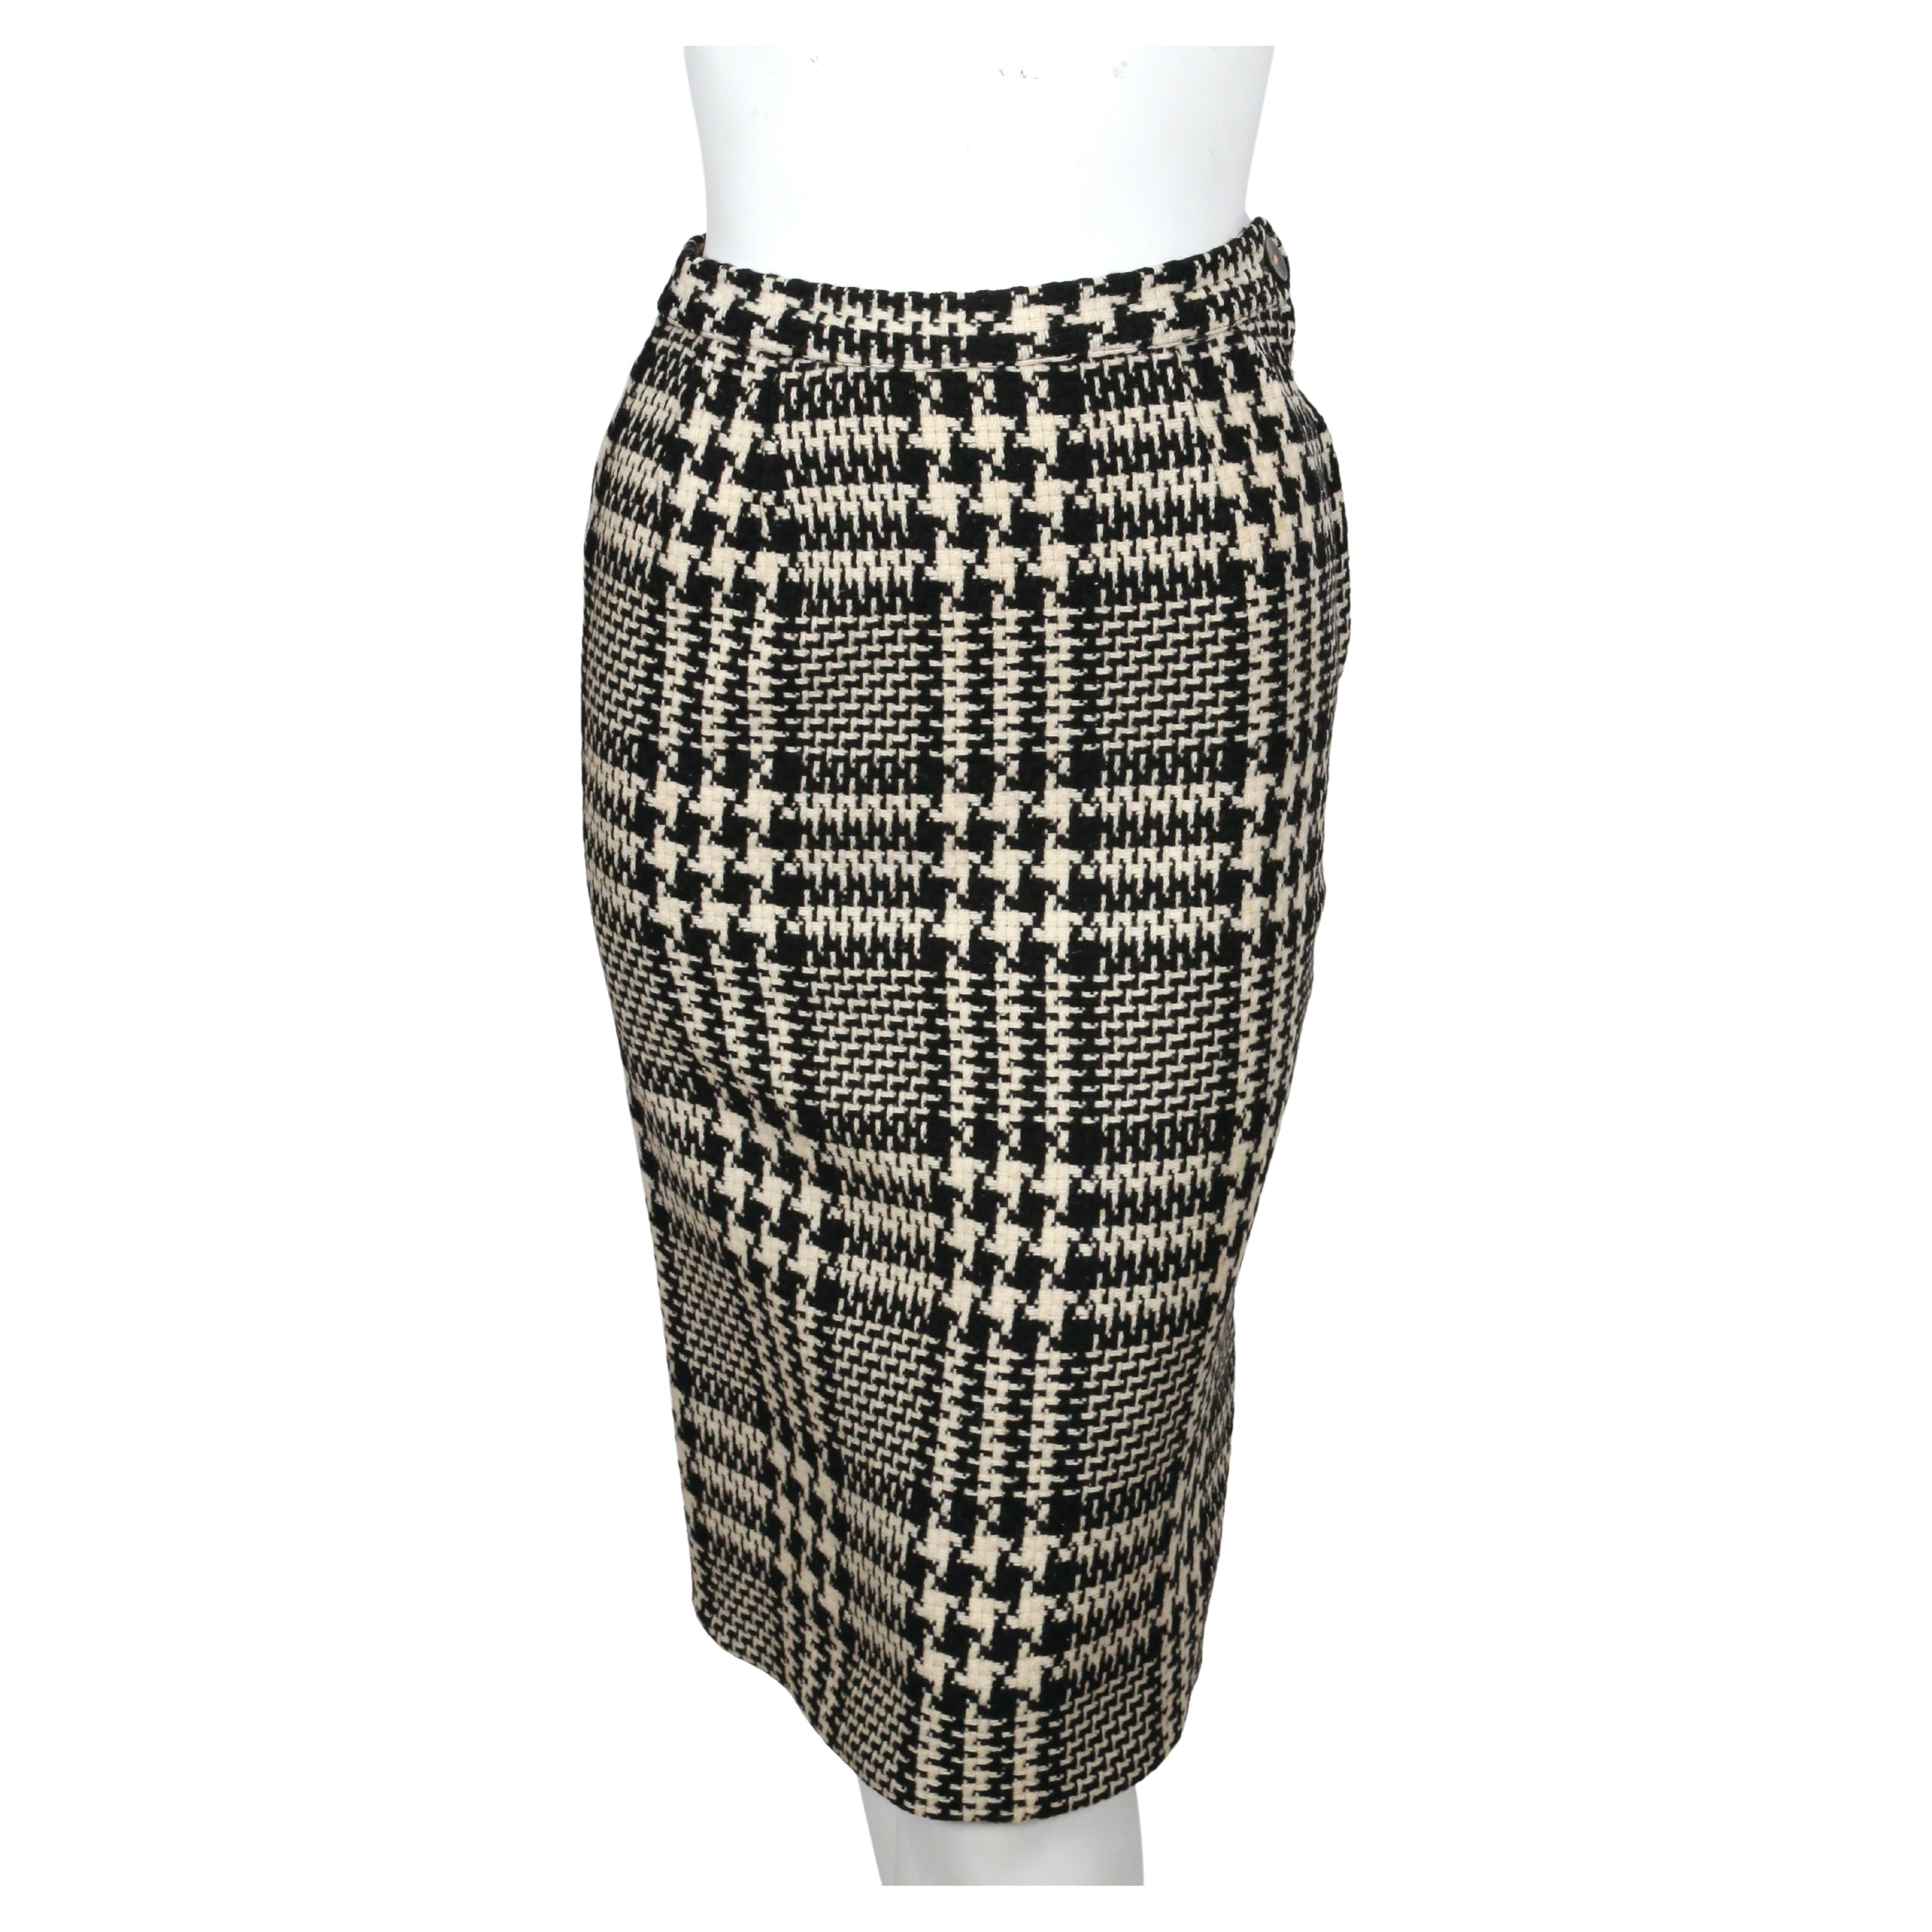 1960's JOSEPH MAGNIN wool houndstooth swing coat with neck tie & skirt For Sale 1